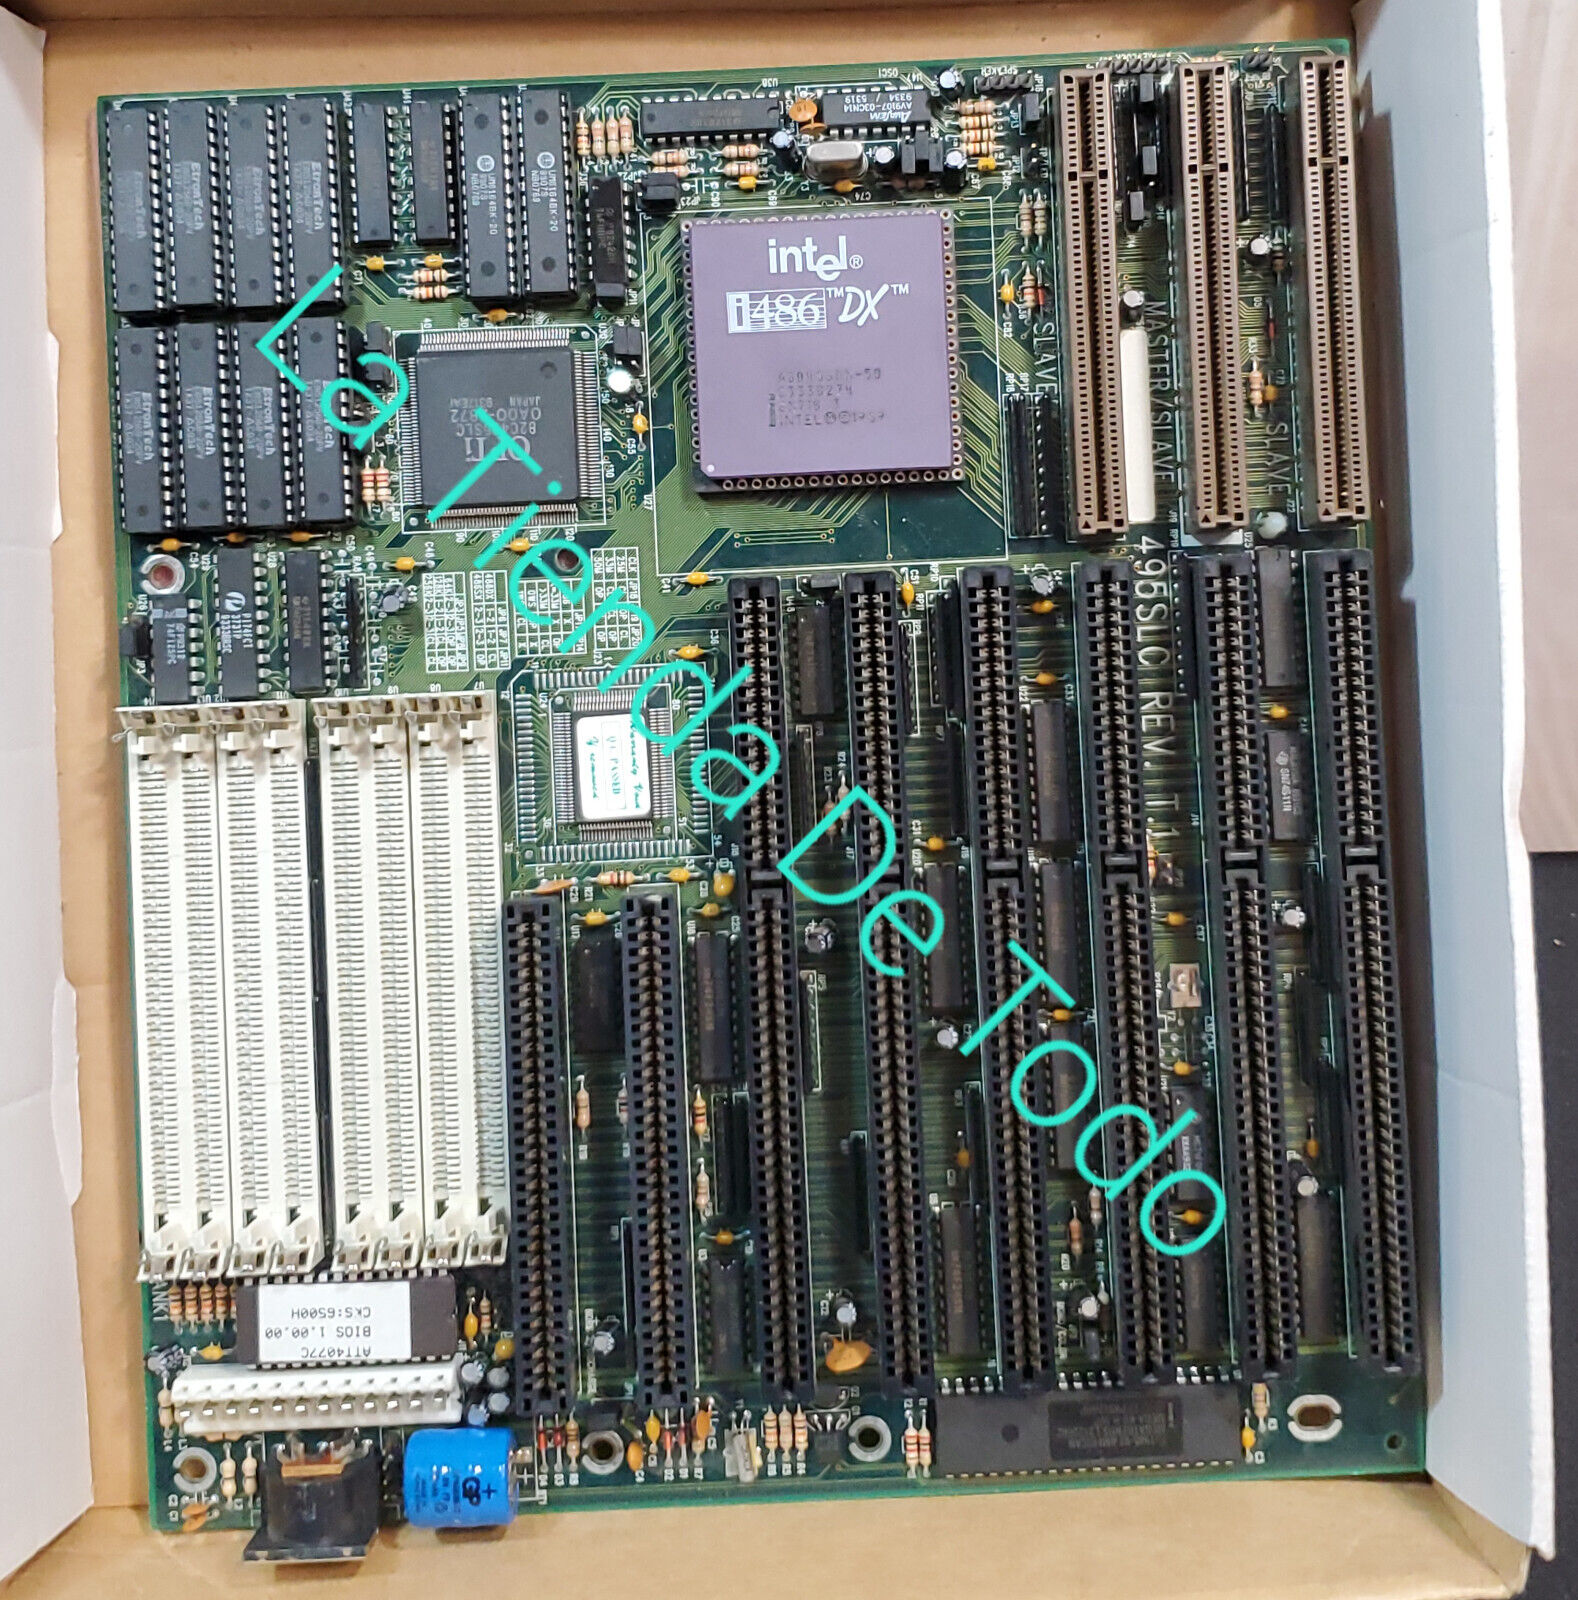 VINTAGE 1989 INTEL 486DX OR I486 DX COMPUTER SOLD AS A NOVELTY COLLECTIBLE READ